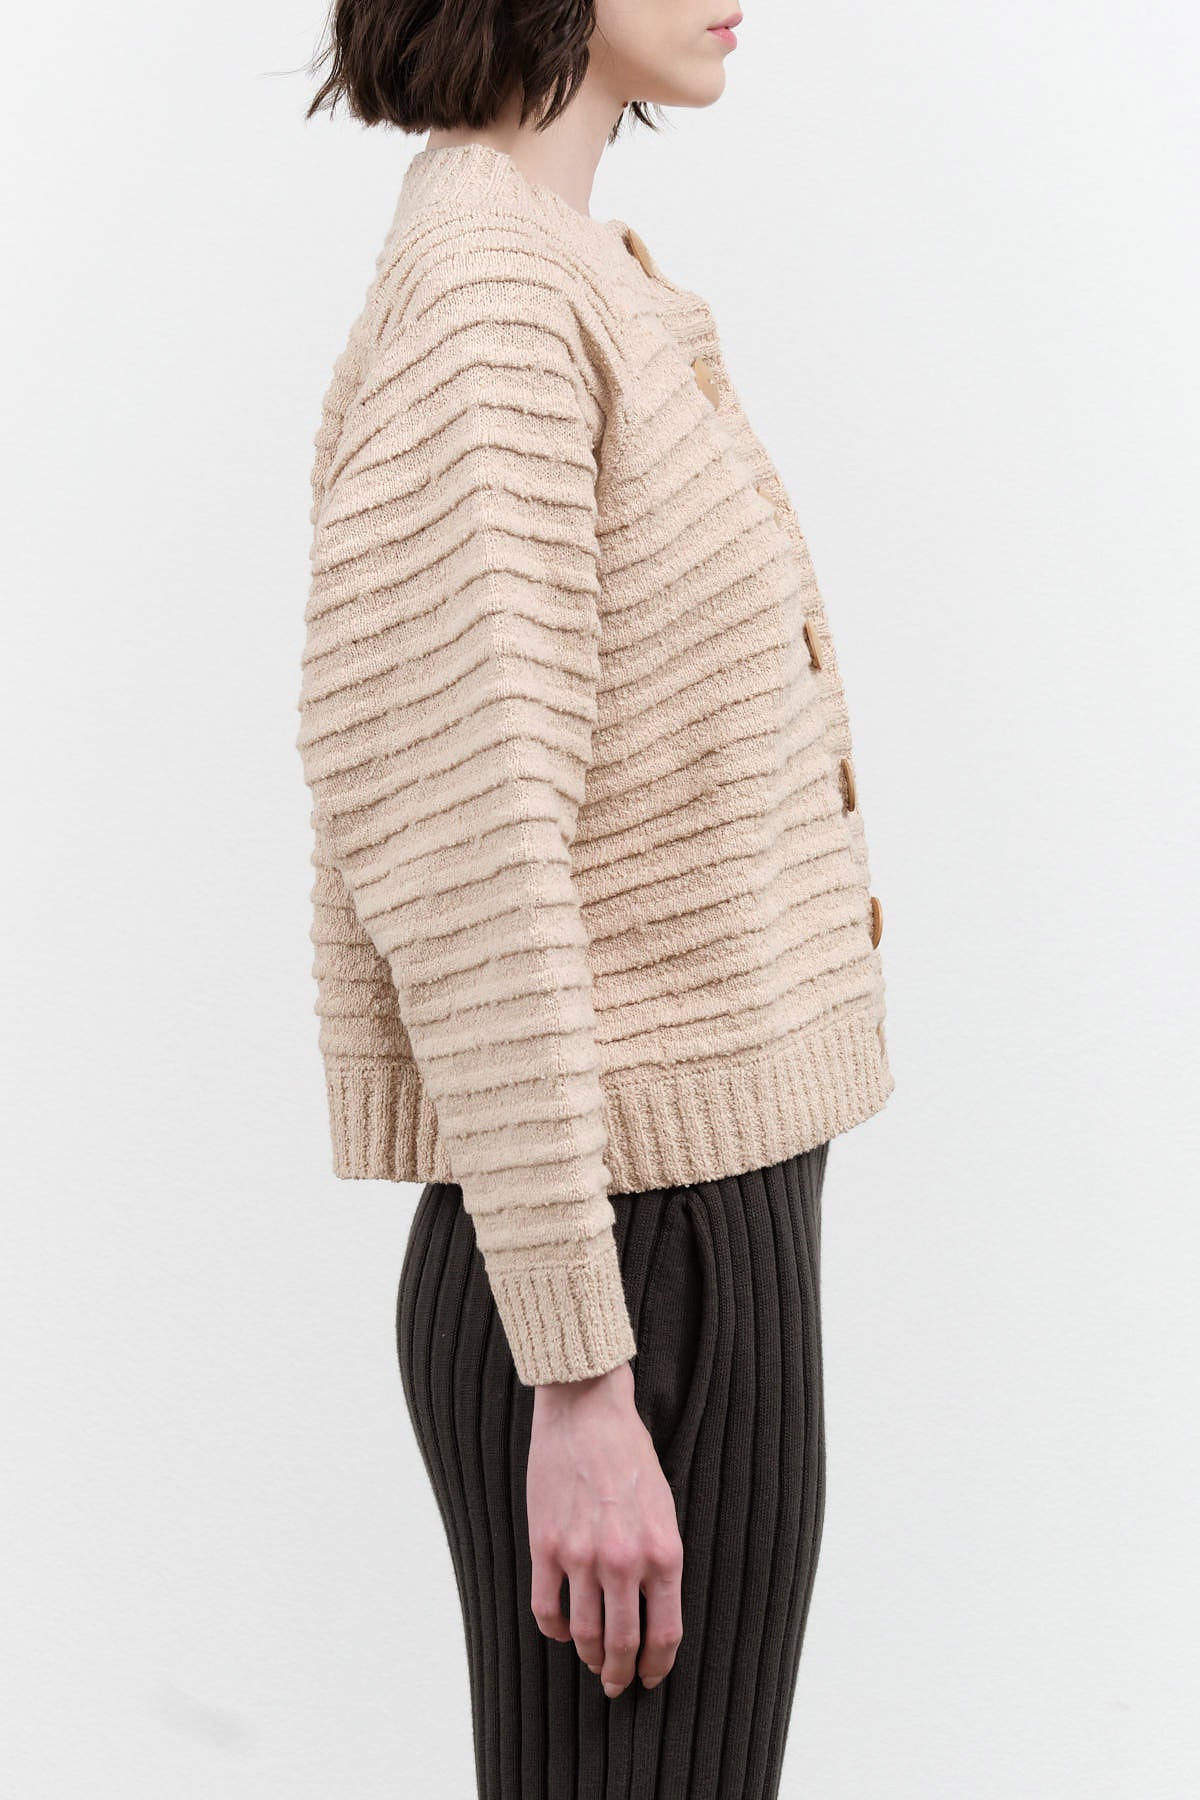 Wol Hide Boxy Ripple Bomber Cardigan with Wood Buttons in Tan